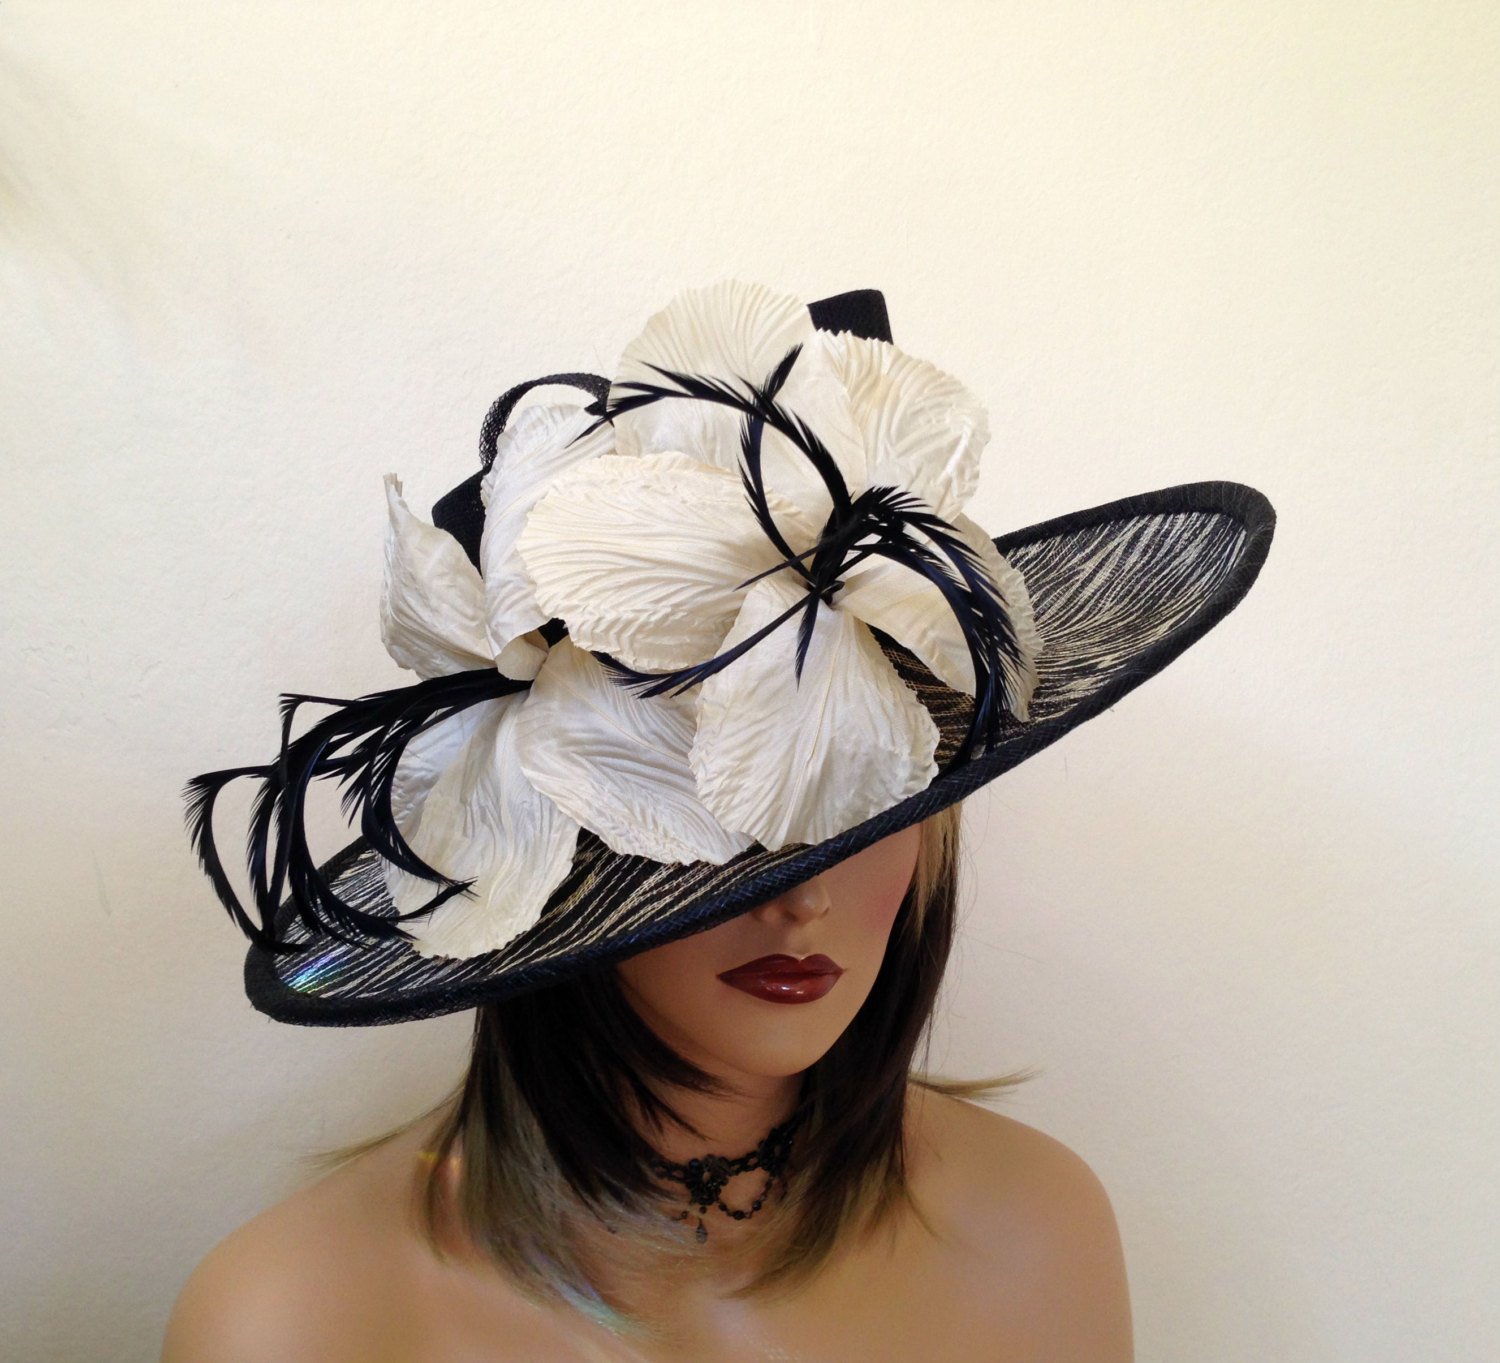 Kentucky Derby  hat.Royal Ascot,Del Mar,Formal hat.Animal print  black hat for Weddings, church, races, parties and other special occassions